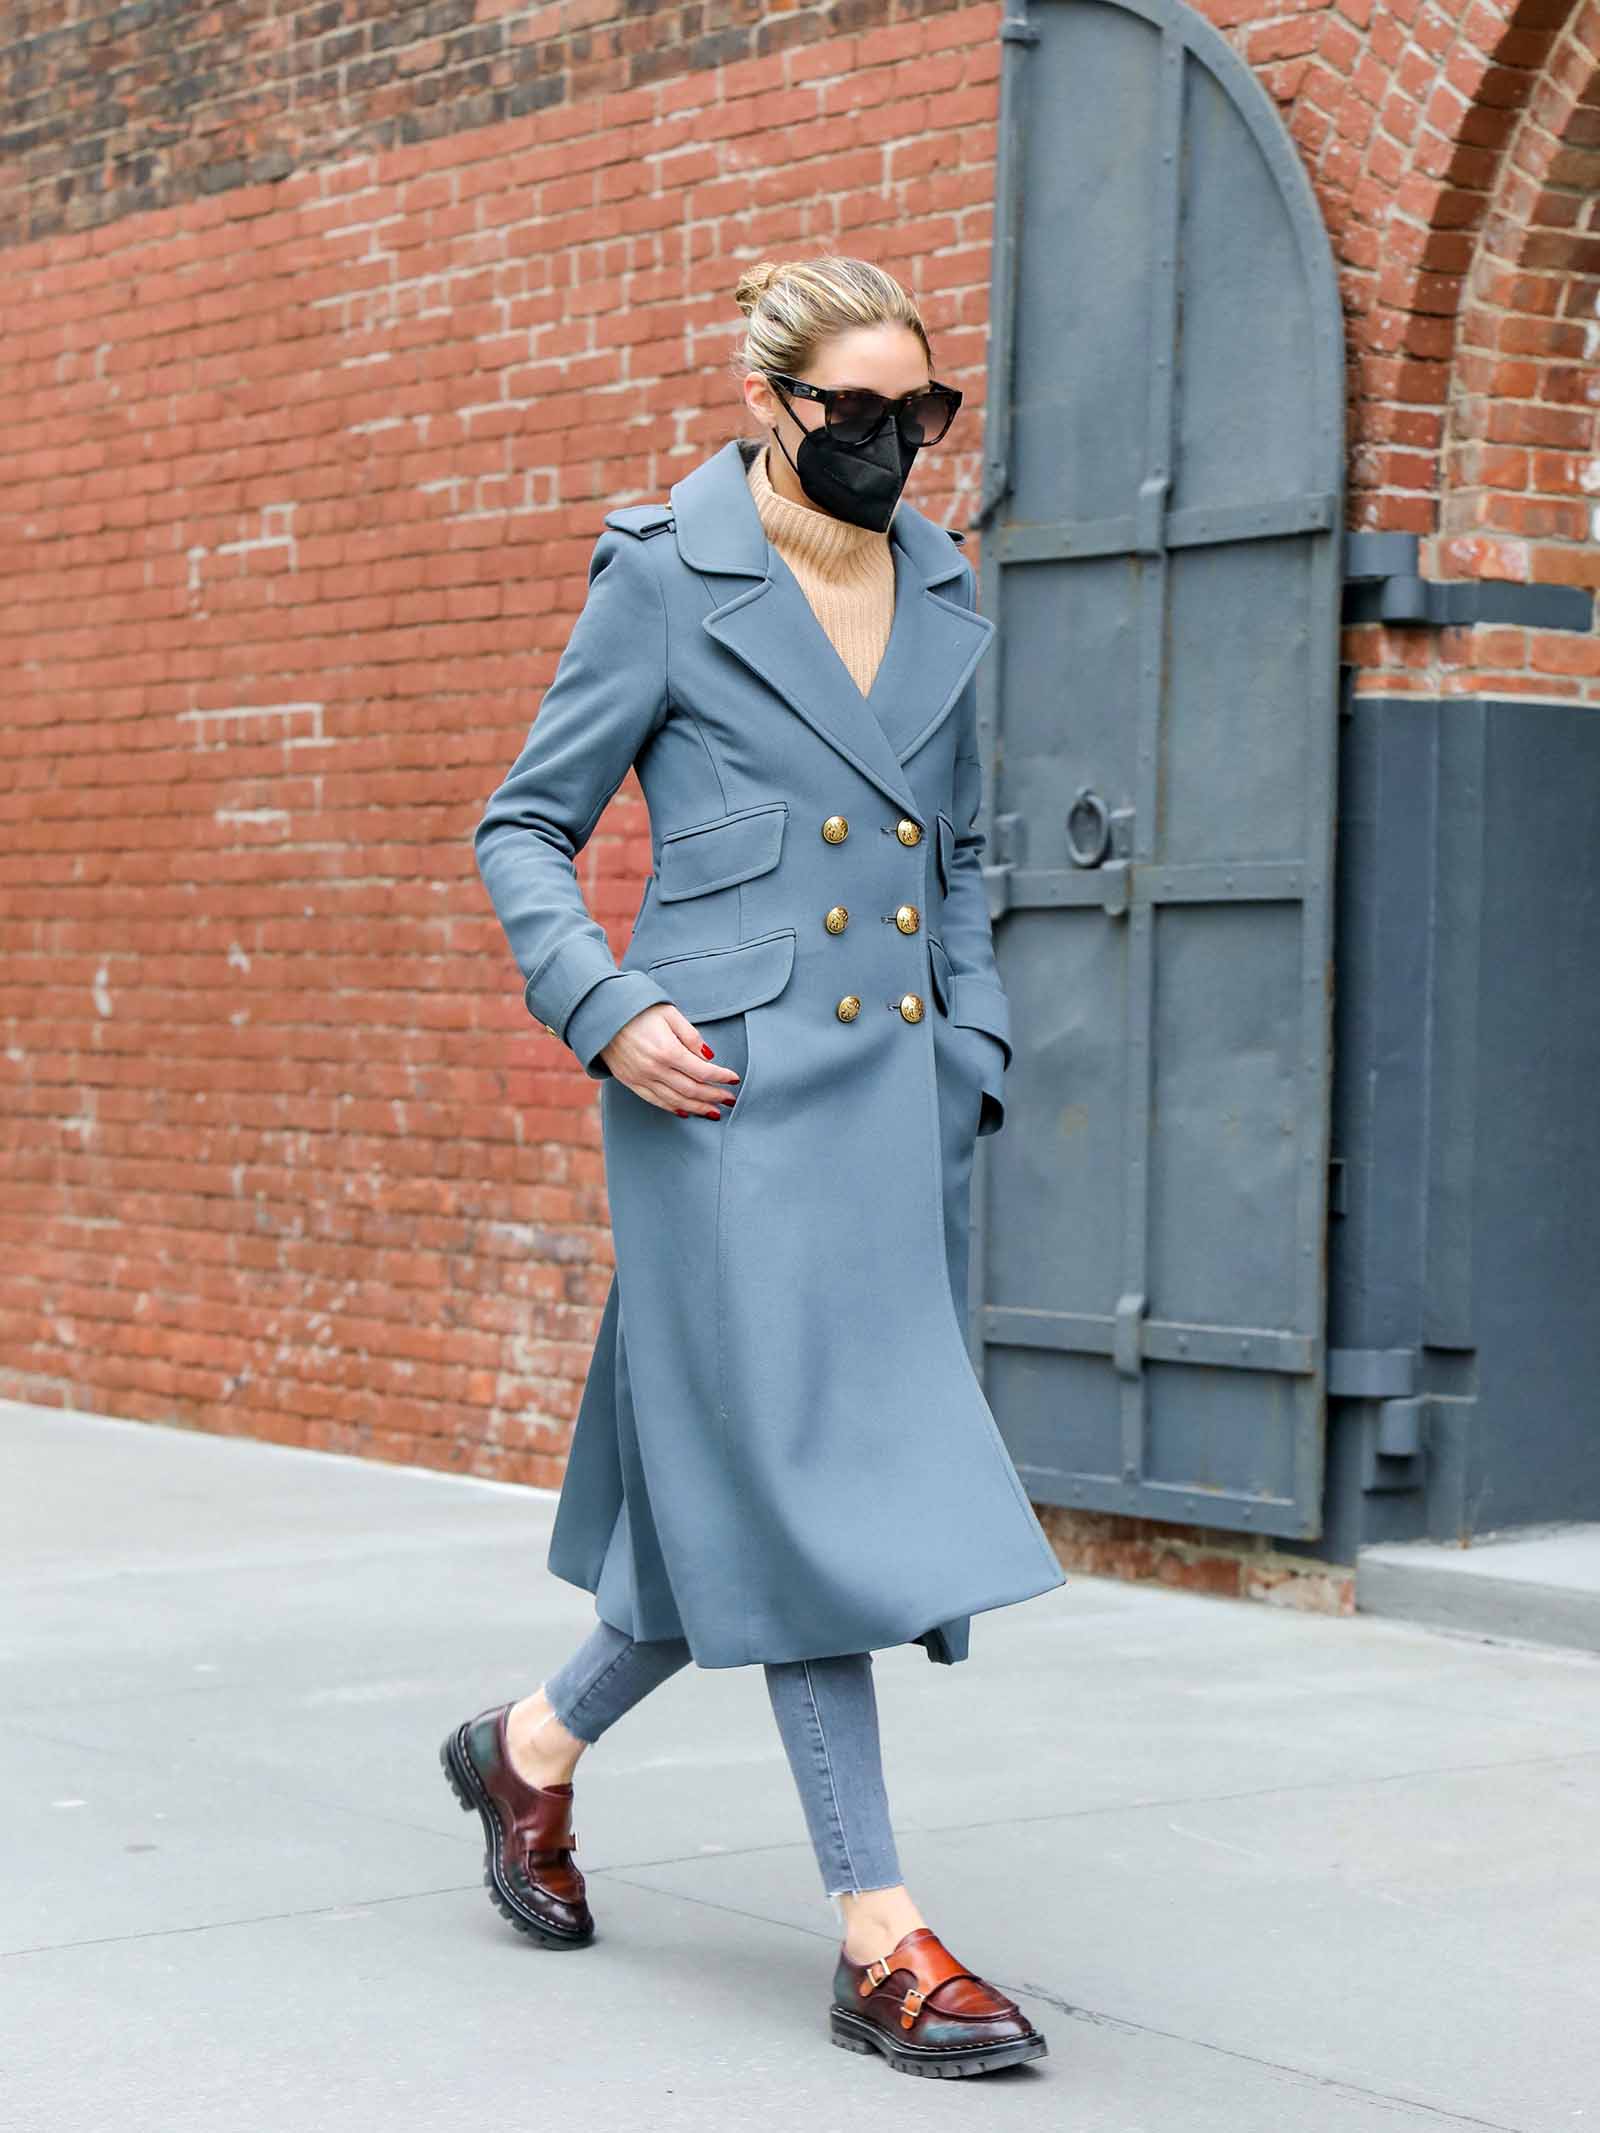 Olivia's Palermo's style is timeless!